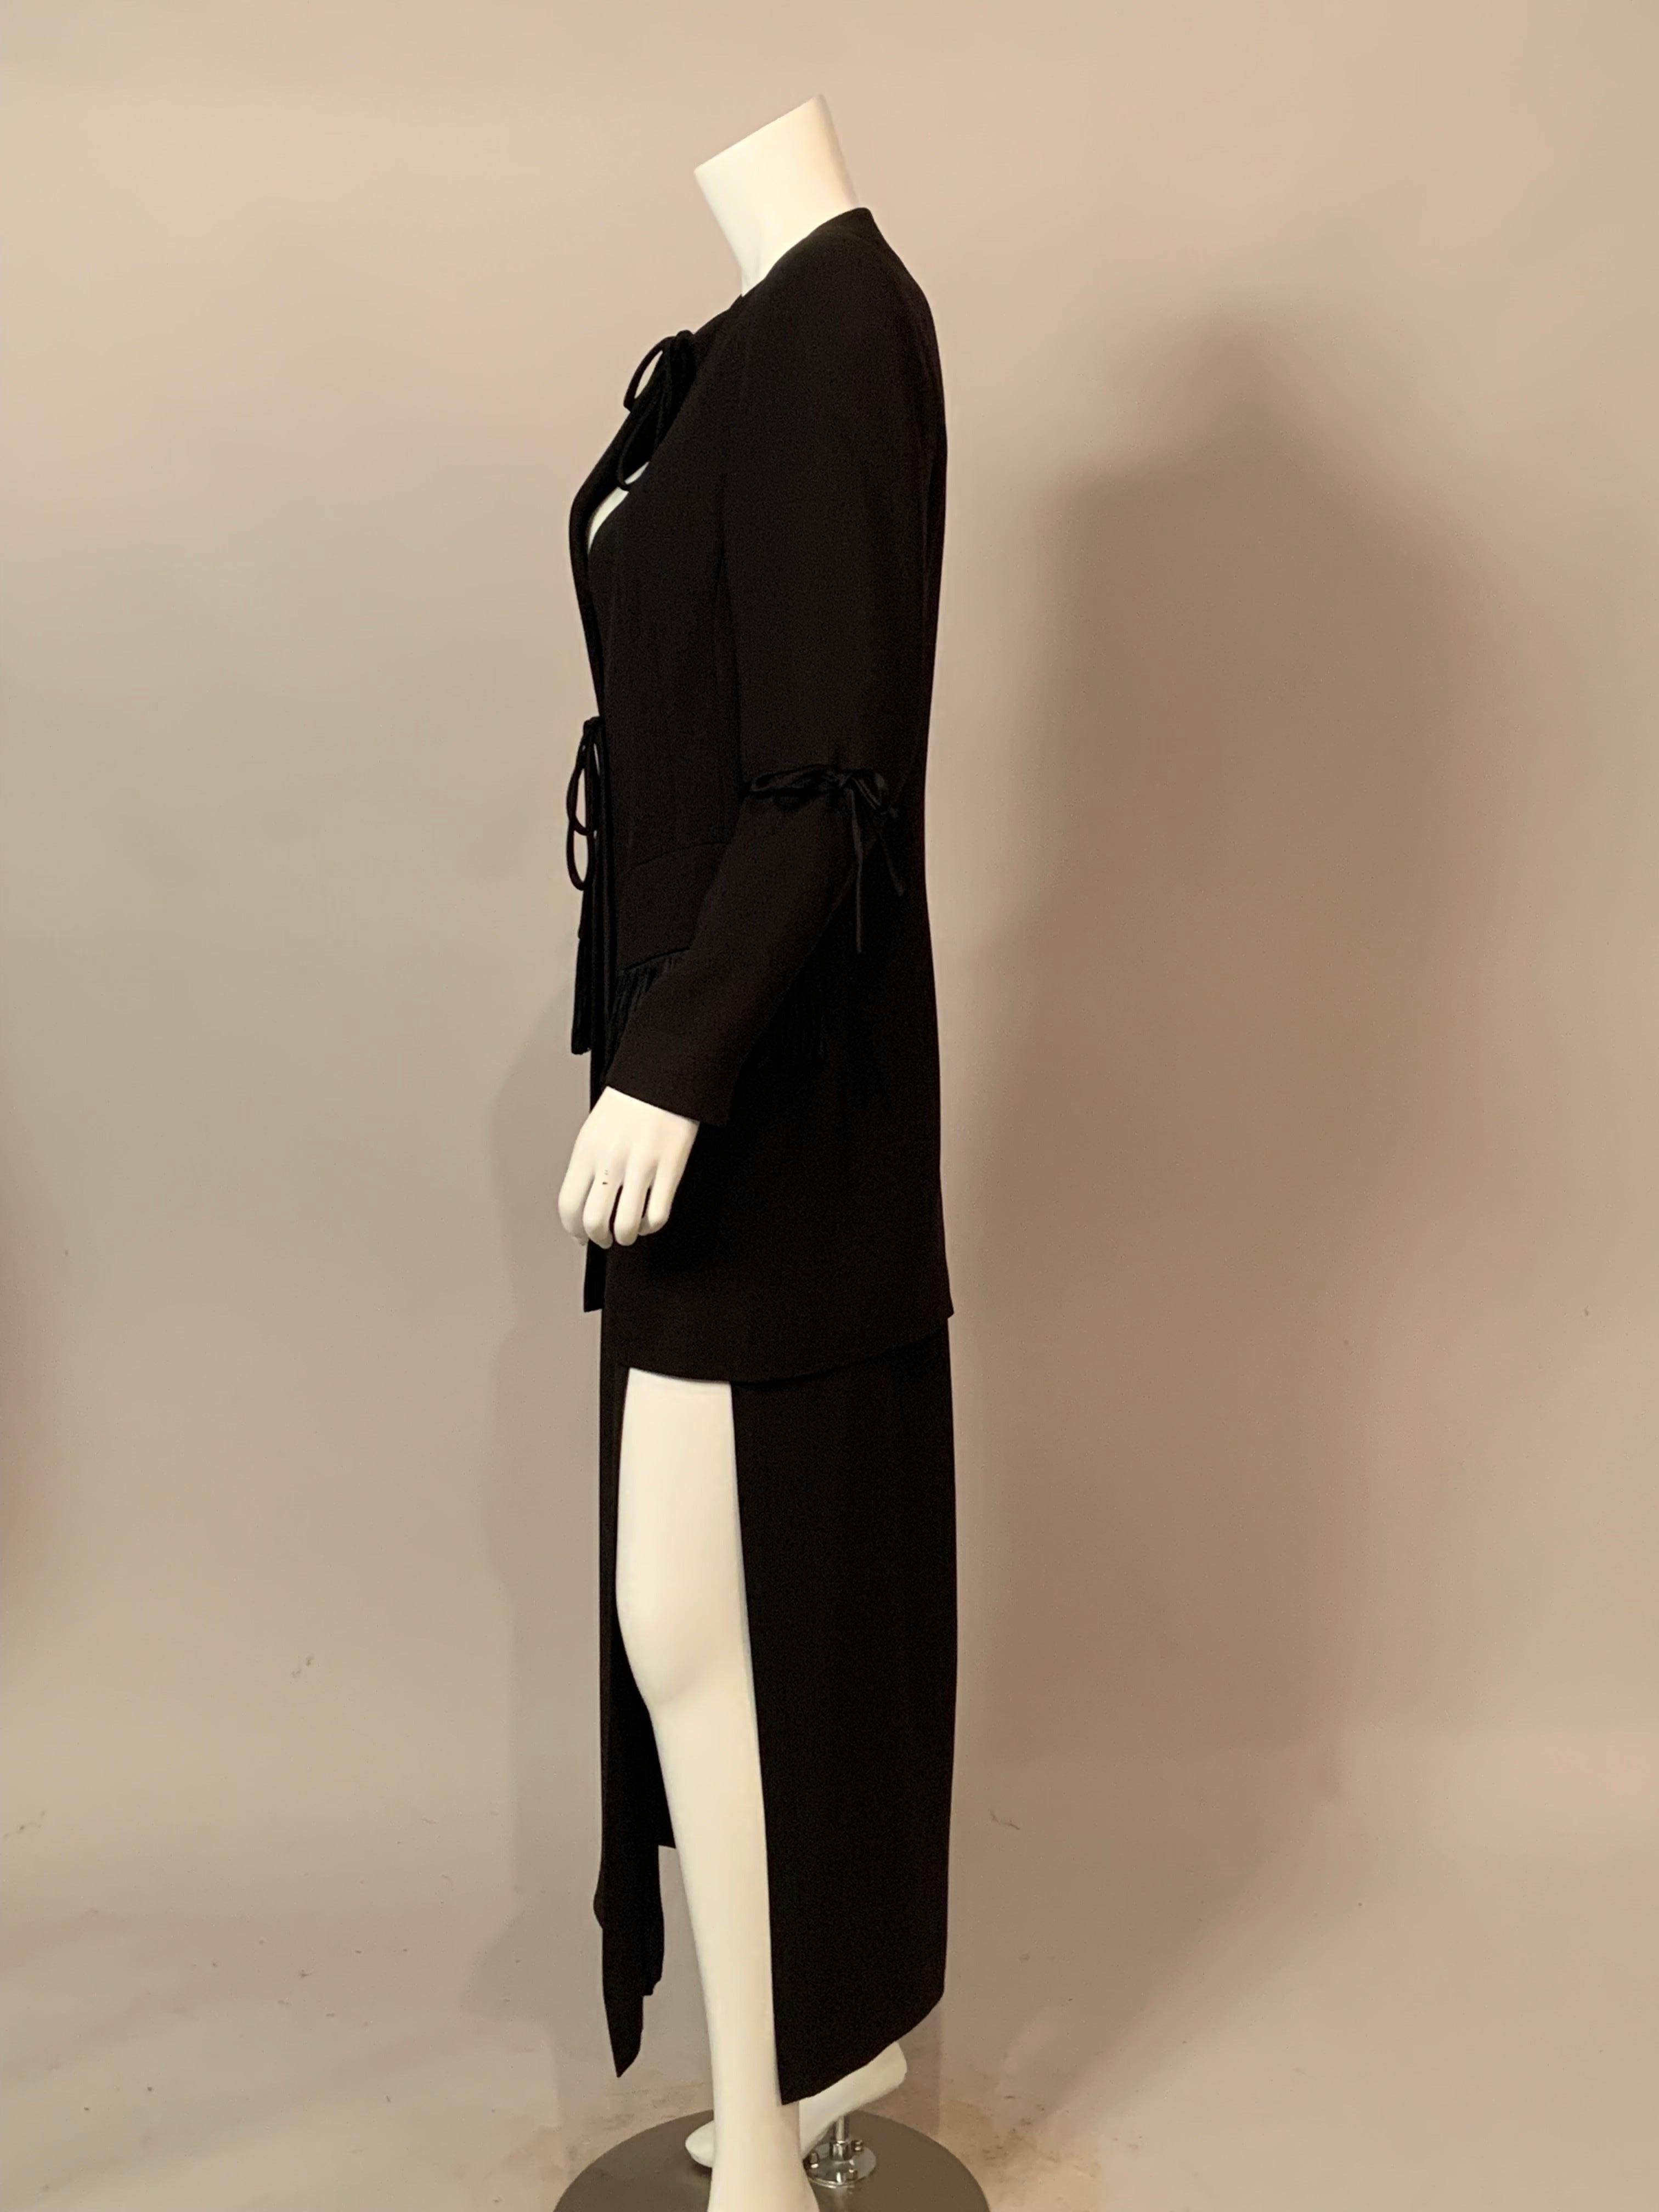 Women's or Men's Chloe Black Silk Evening Suit with Satin Trim Skirt with Very High Side Opening